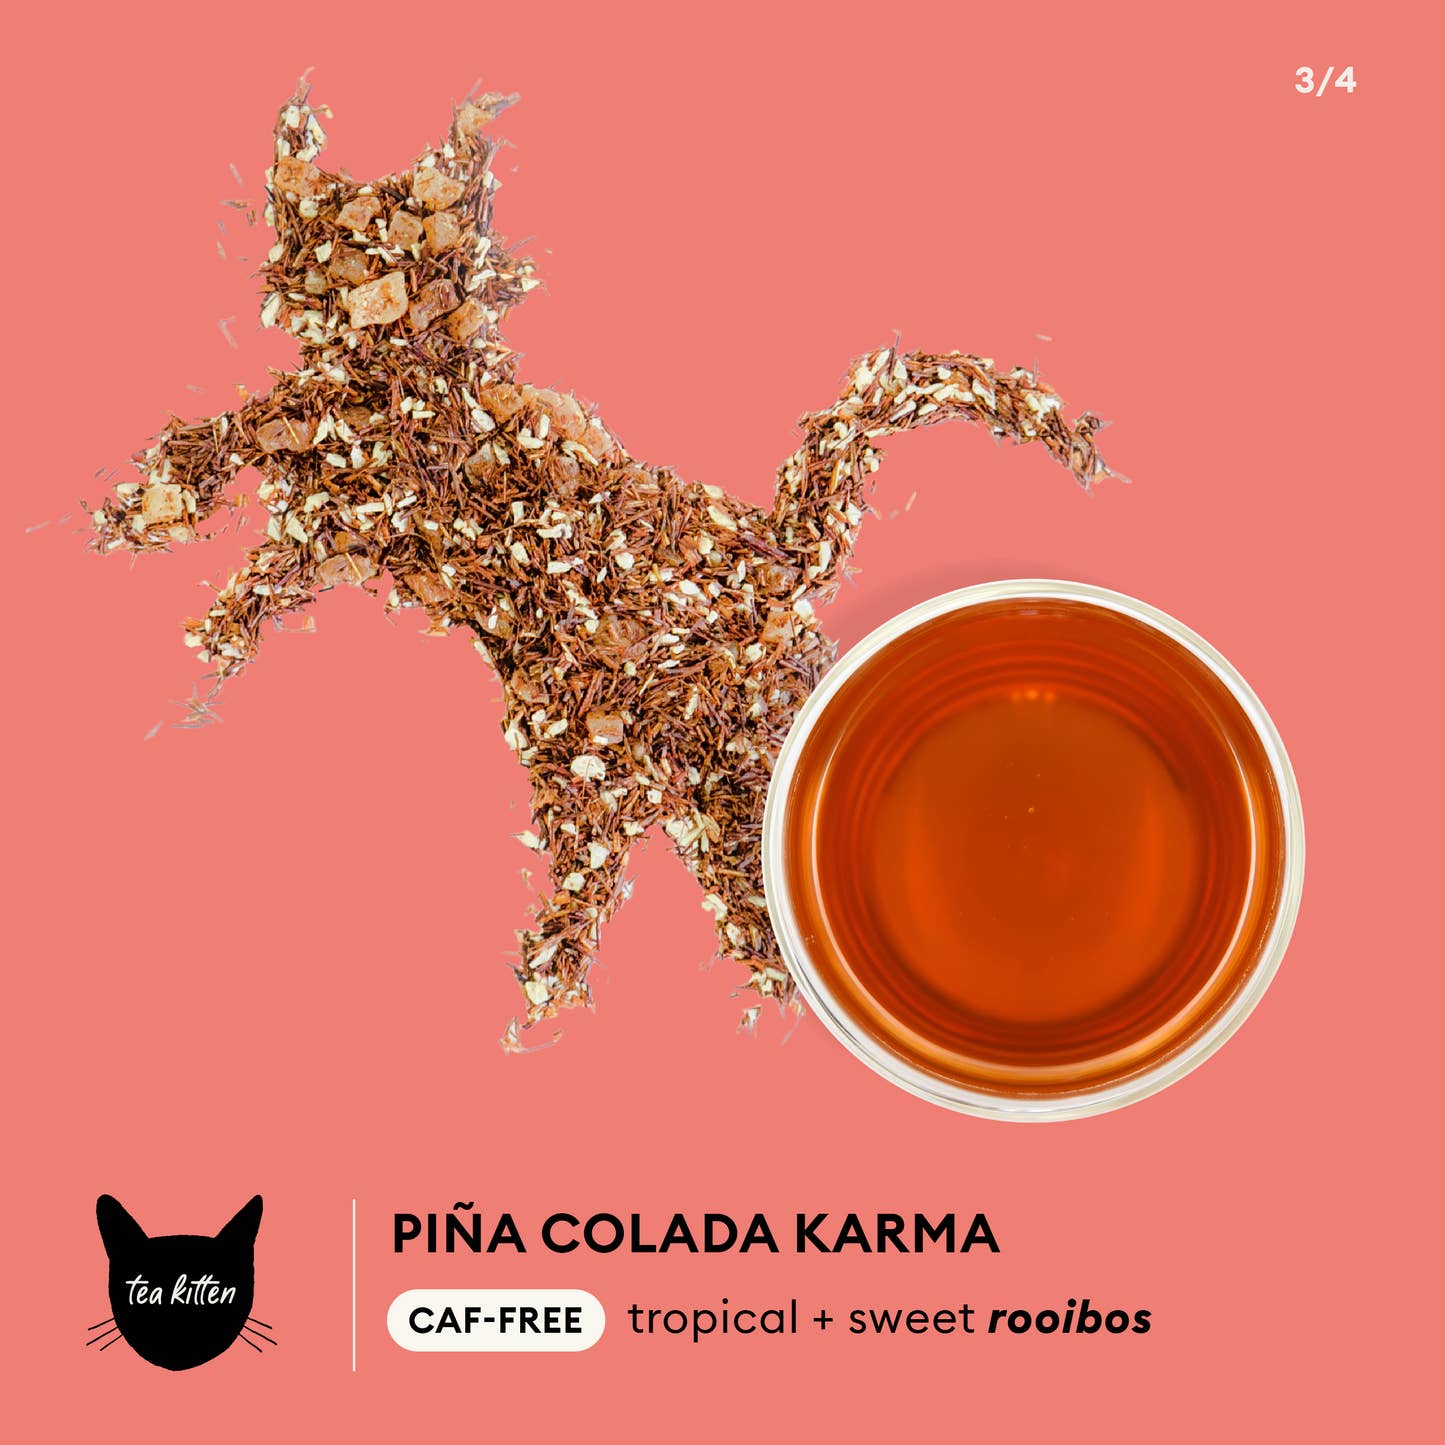 Pina Colada Karma by Tea Kitten Infographic - Caf-Free tropical + sweet rooibos